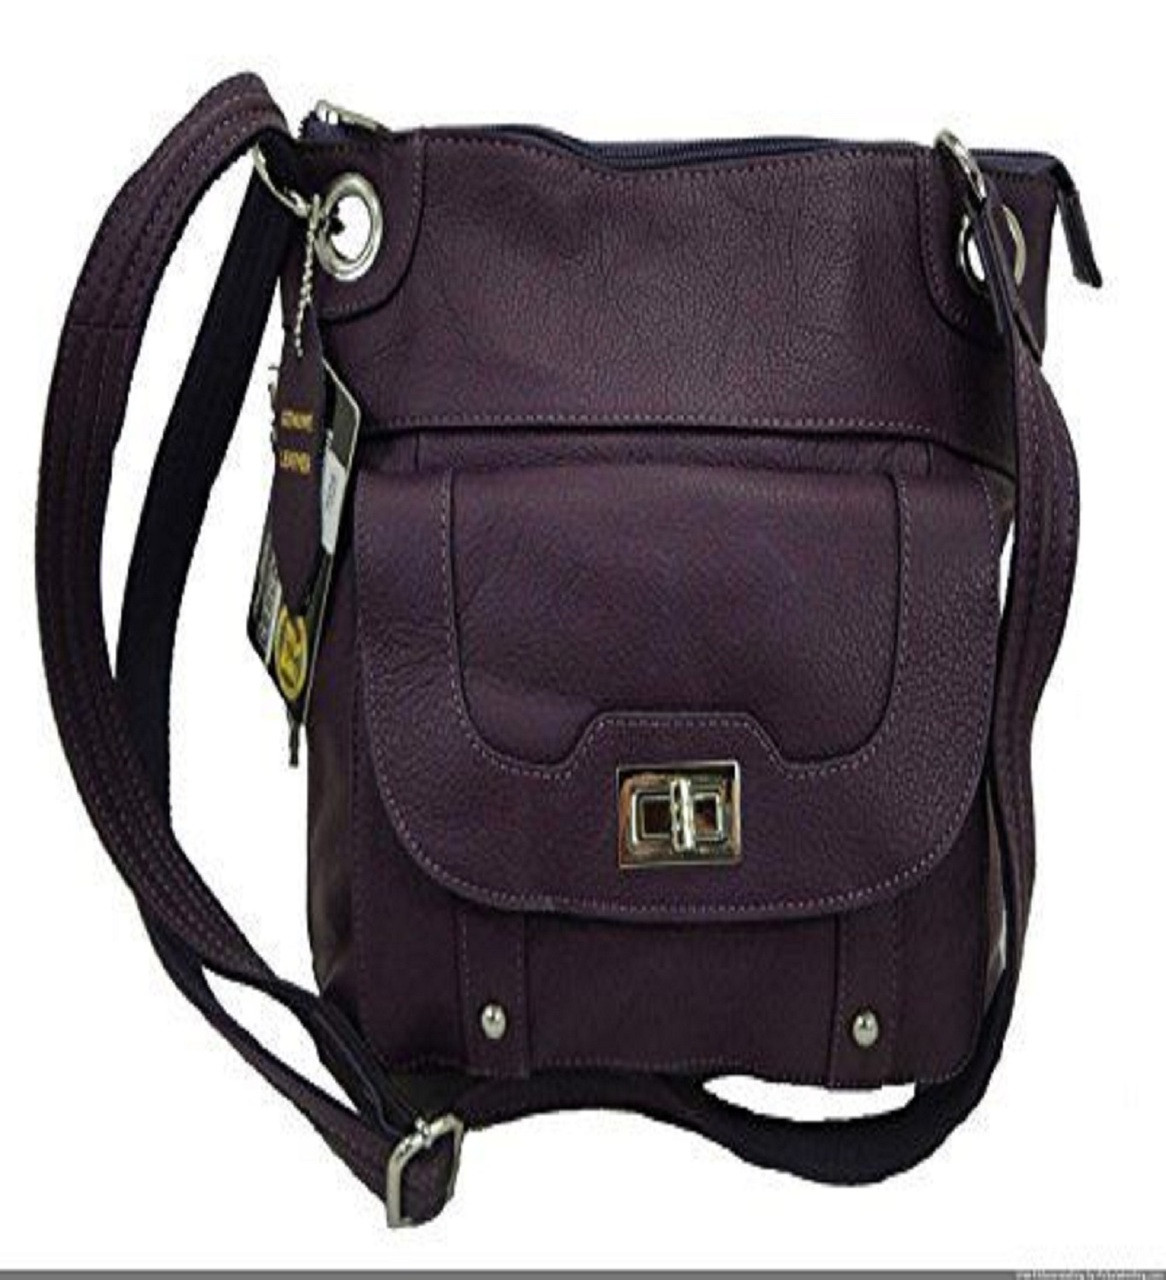 Concealed Carry Cross Body Leather Gun Purse with Slash Resistant Strap